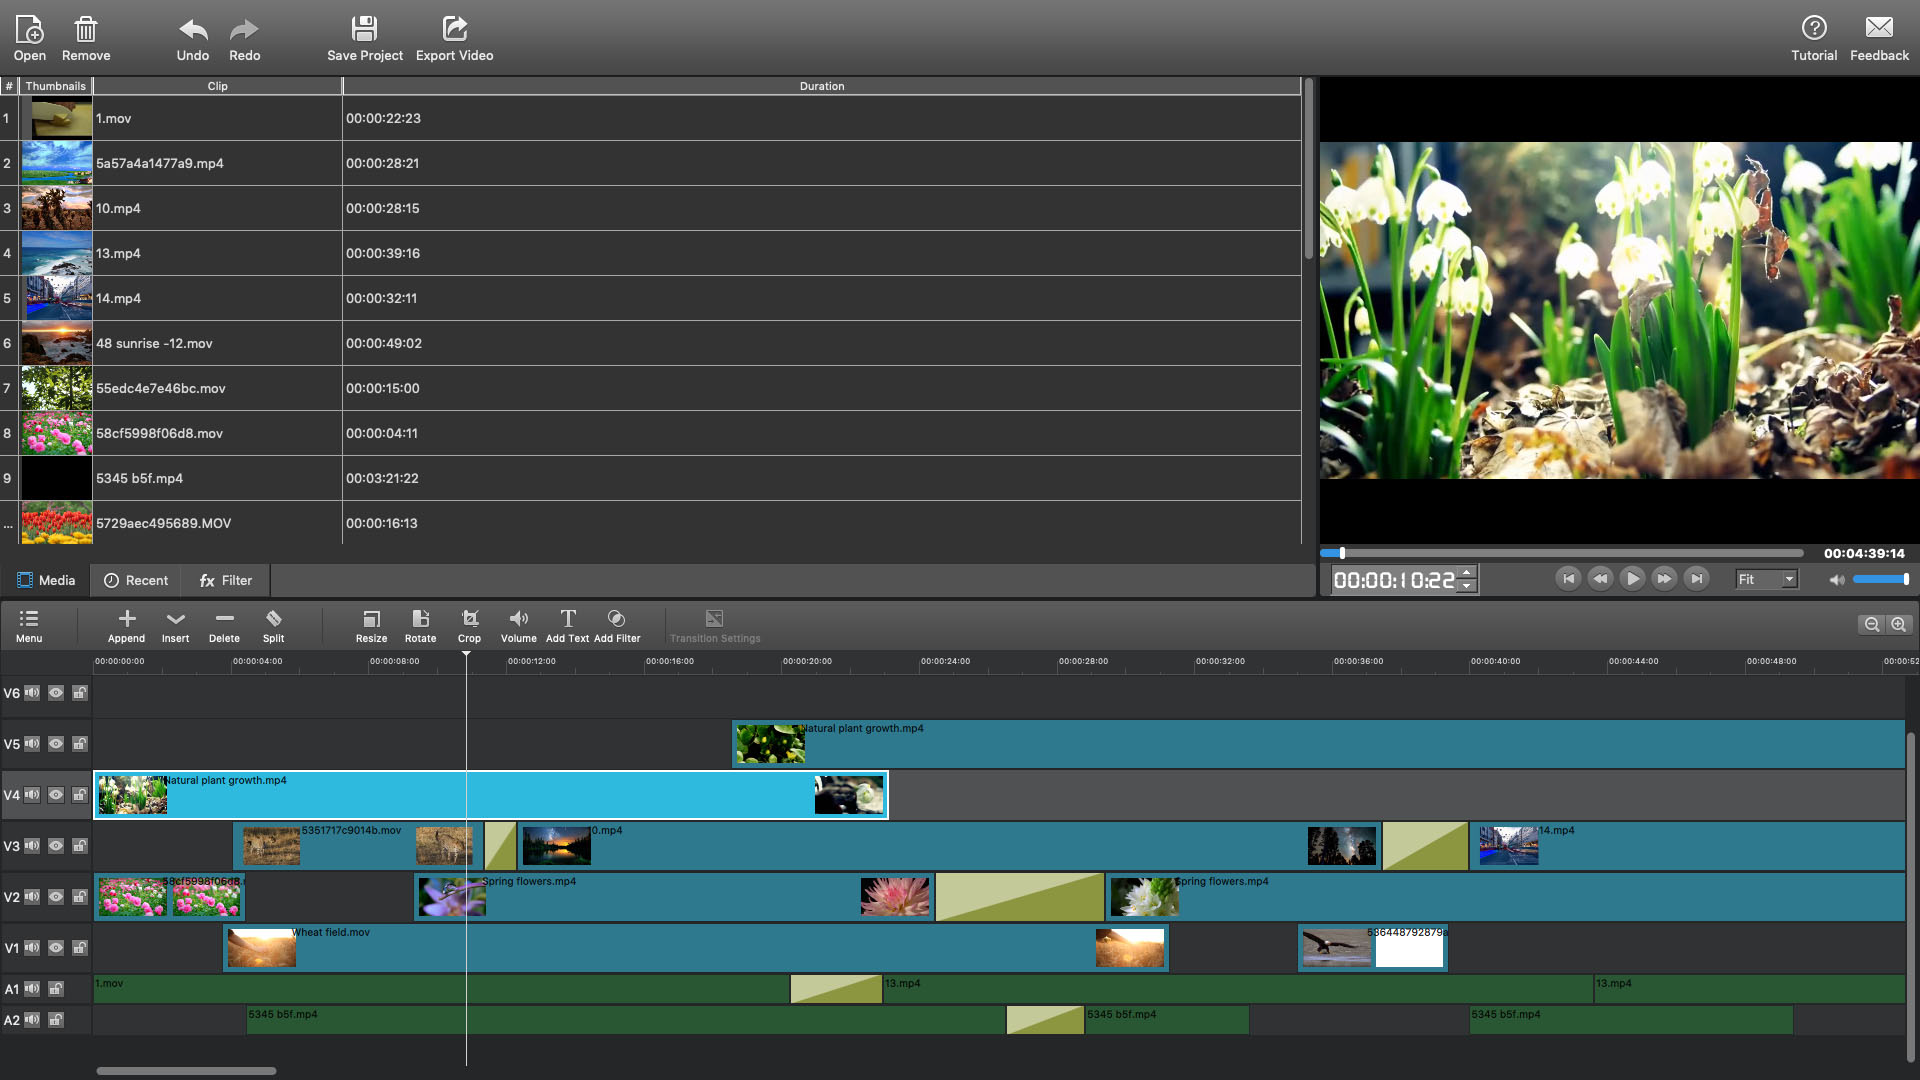 Save 50% on MovieMator Video Editor Pro - Movie Maker, Video Editing  Software on Steam